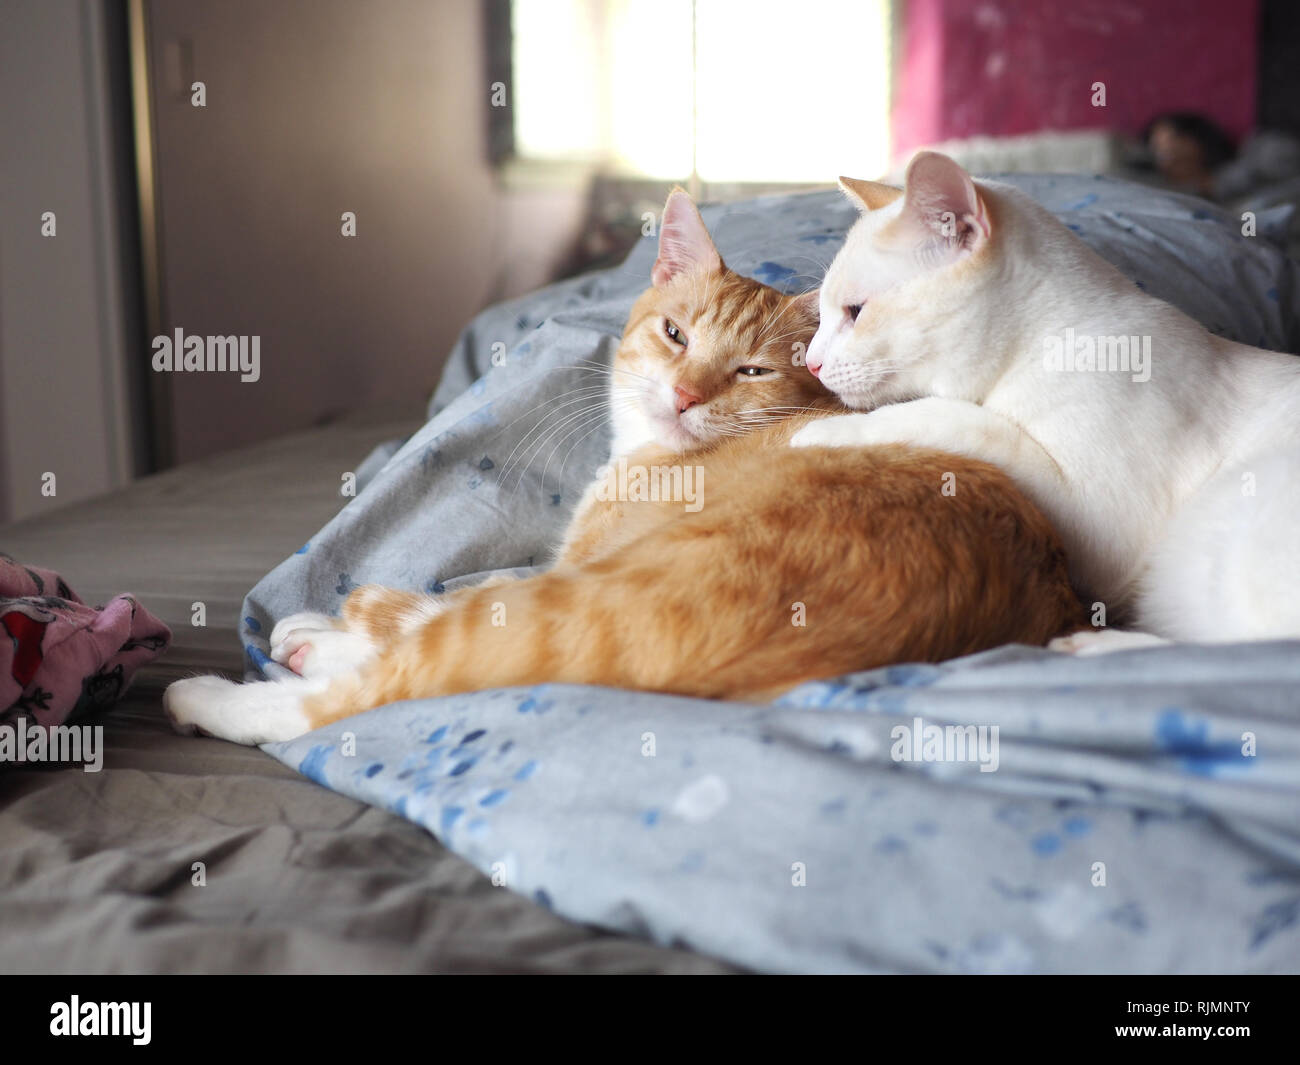 Mika the orange tabby and Mitzie the flame point Siamese snuggling on the bed Stock Photo